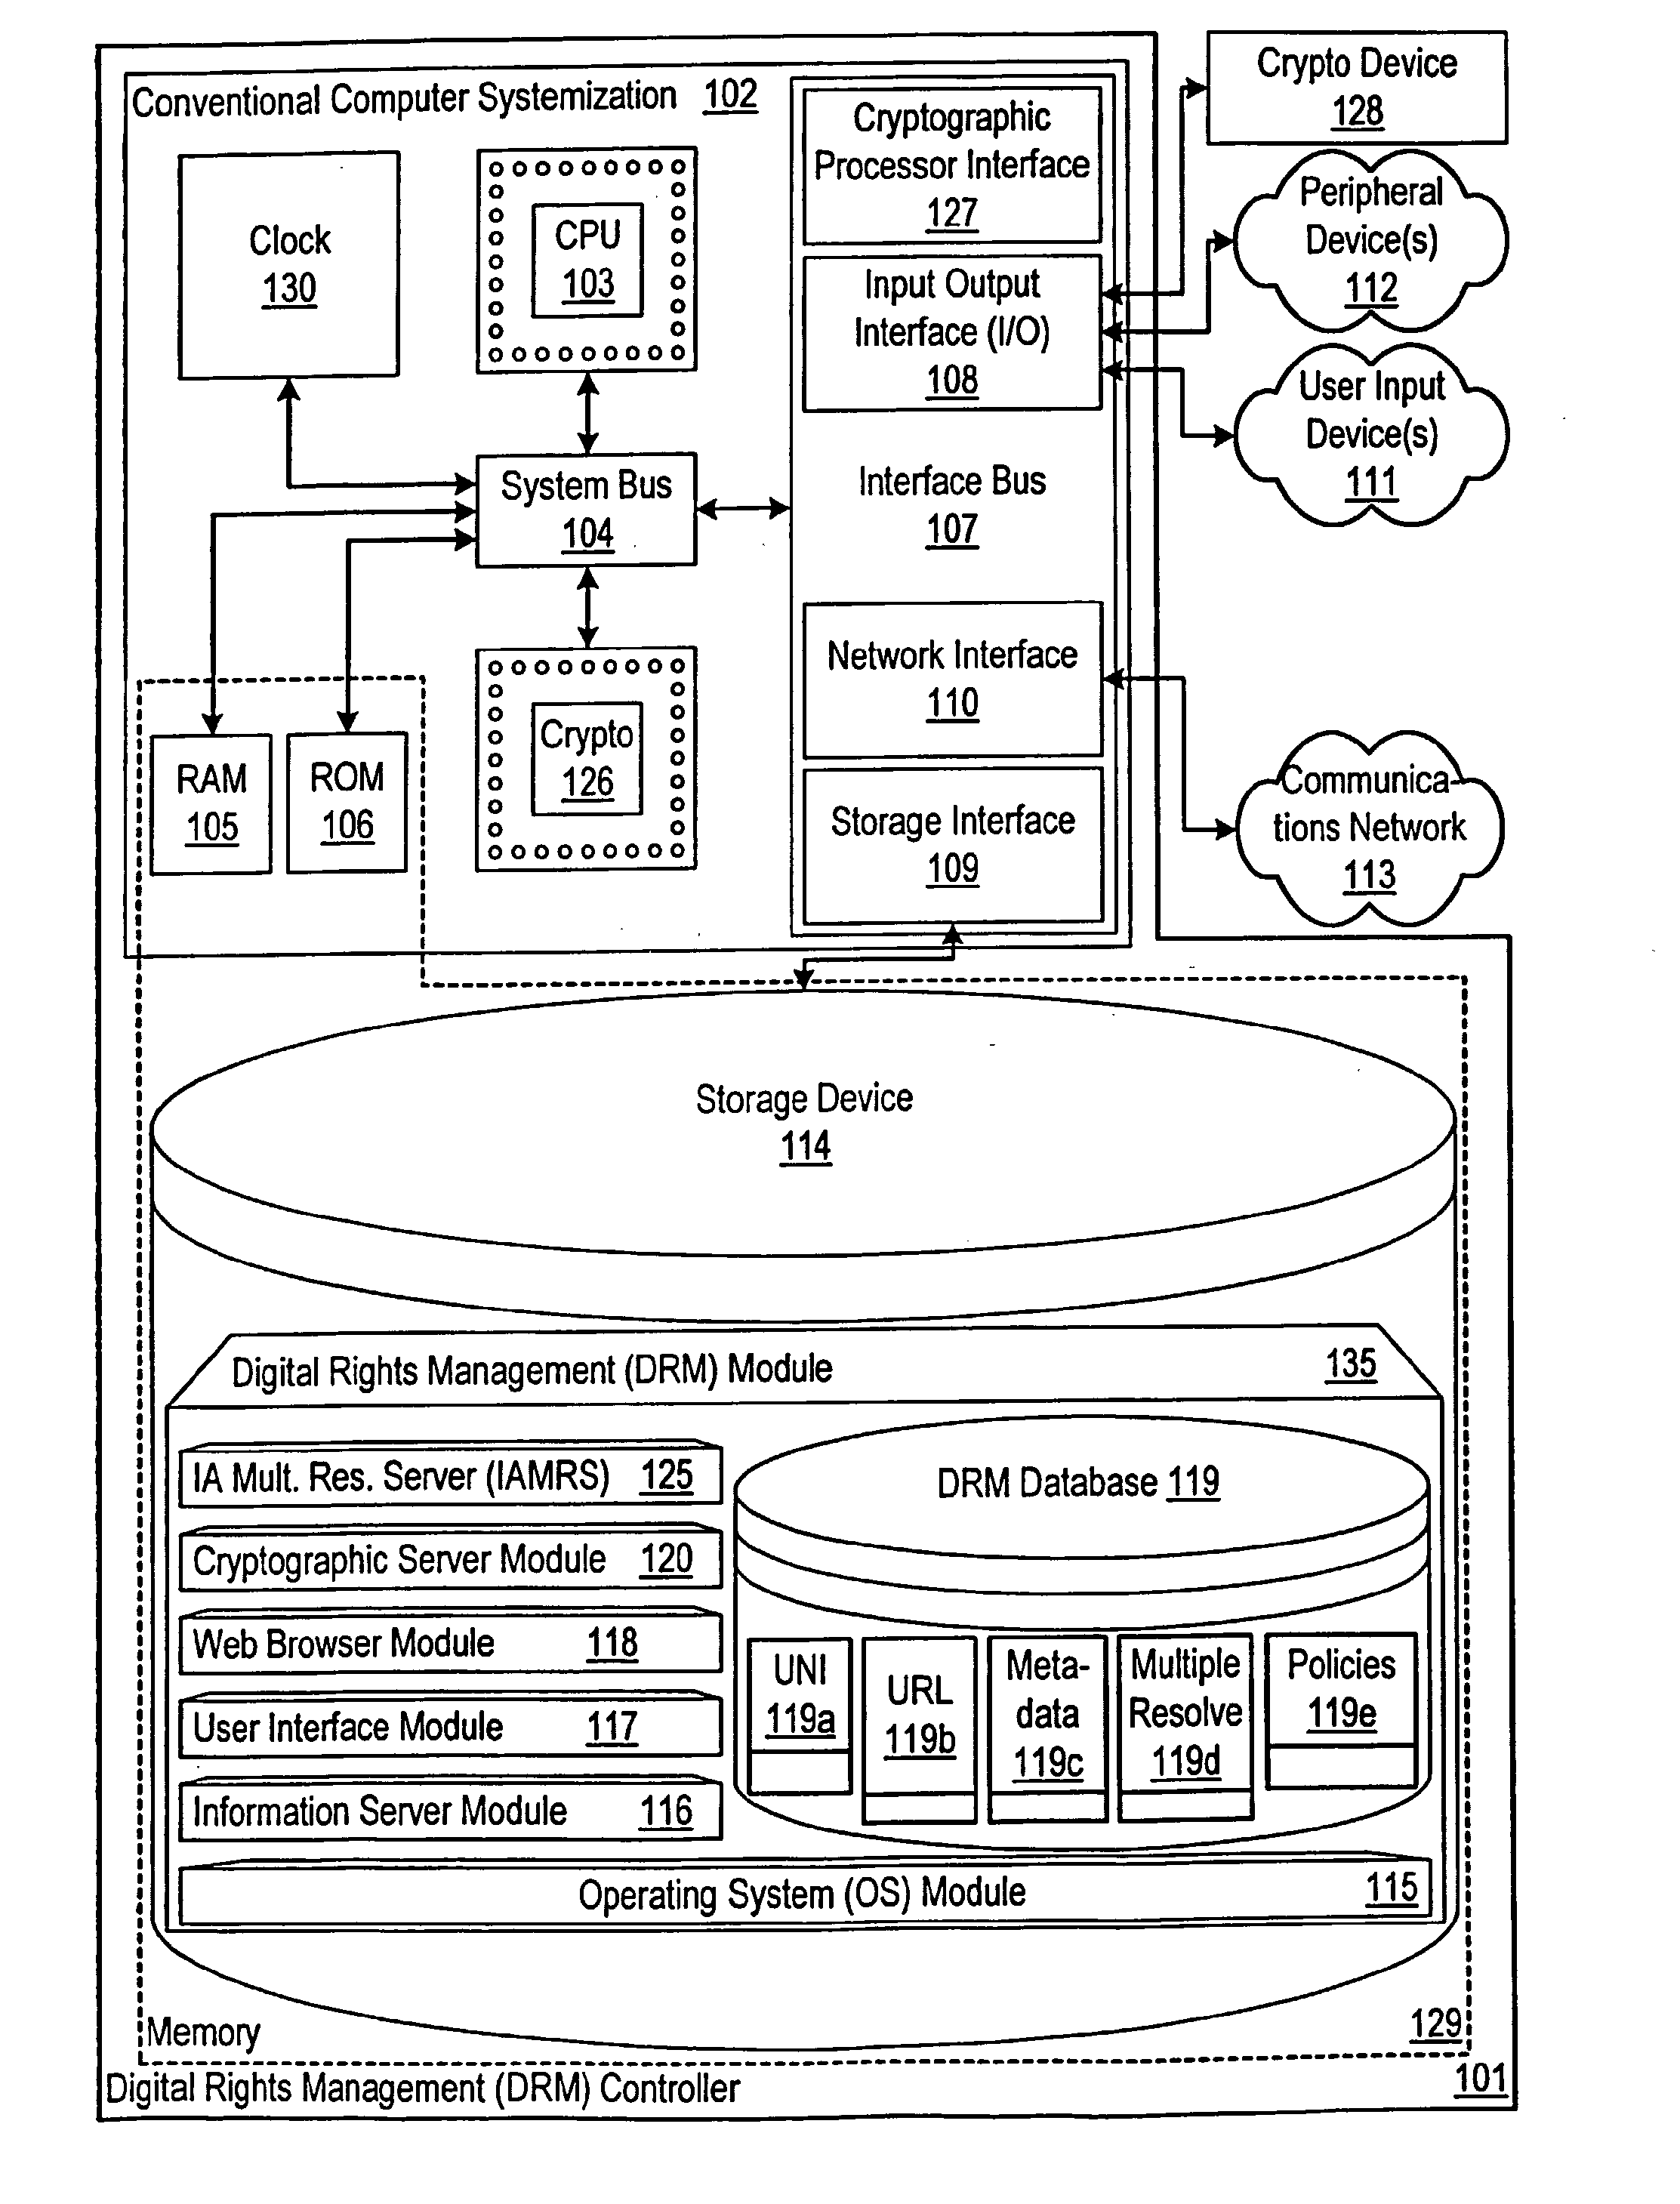 Apparatus, Method and System for Accessing Digital Rights Management Information